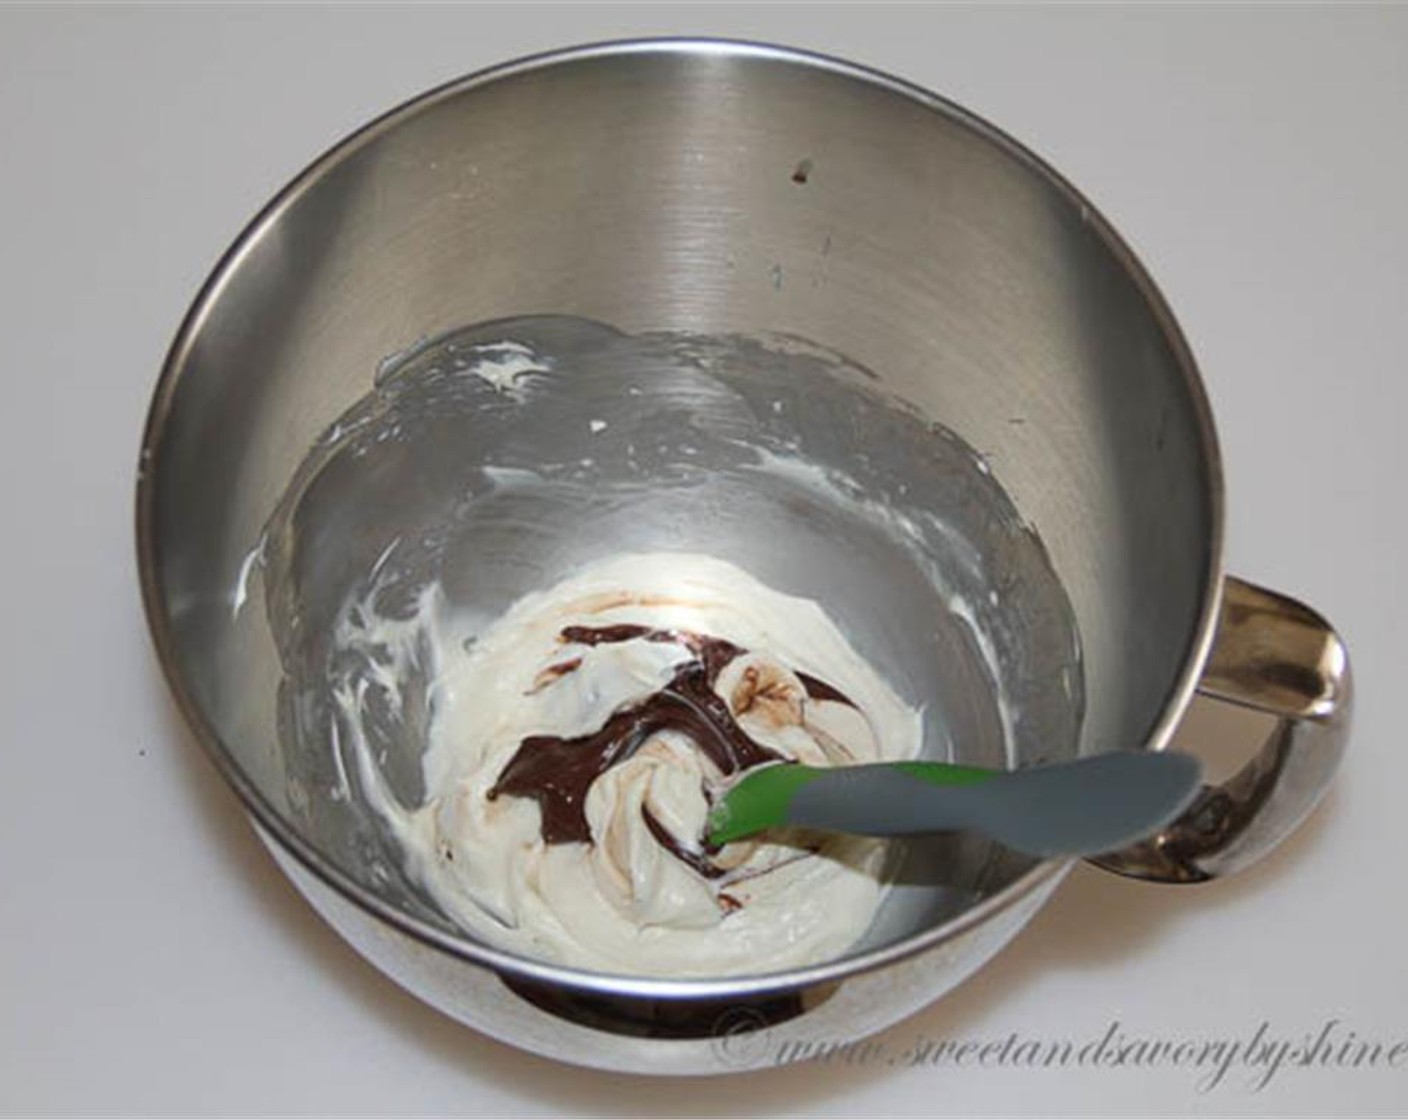 step 2 In a mixing bowl with a whisk attachment, beat the Cream Cheese (1/2 cup), Sweetened Condensed Milk (1/4 cup) and Vanilla Extract (1/2 tsp) together until well combined. Swirl Nutella® (2 Tbsp) in to bowl to mix throughout.